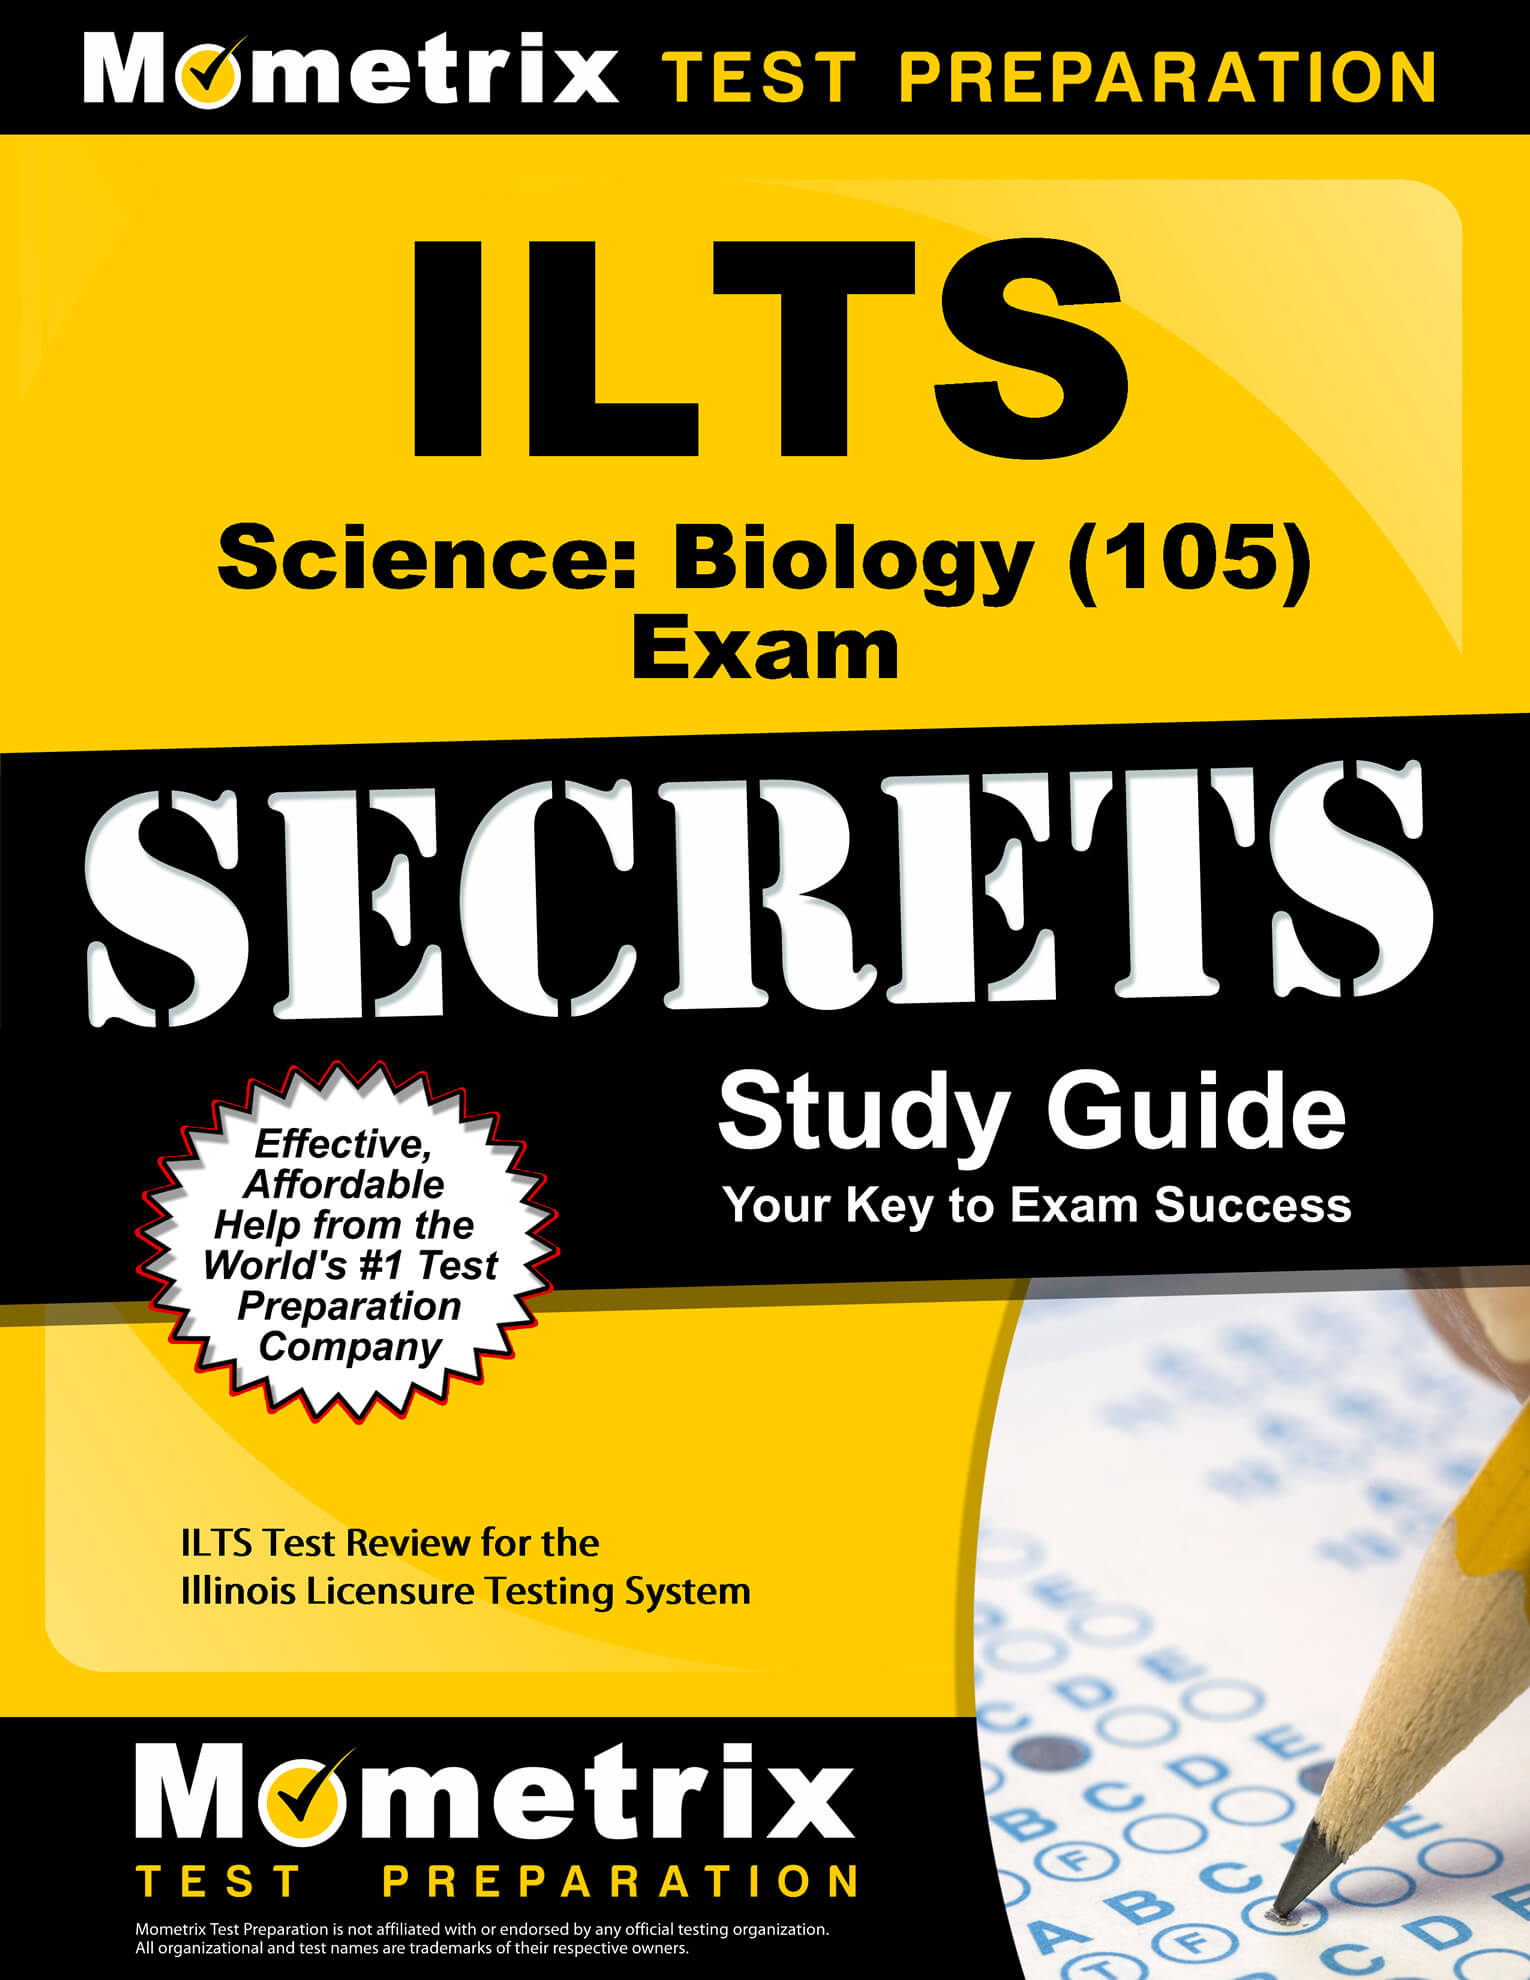 ILTS Science: Biology Study Guide